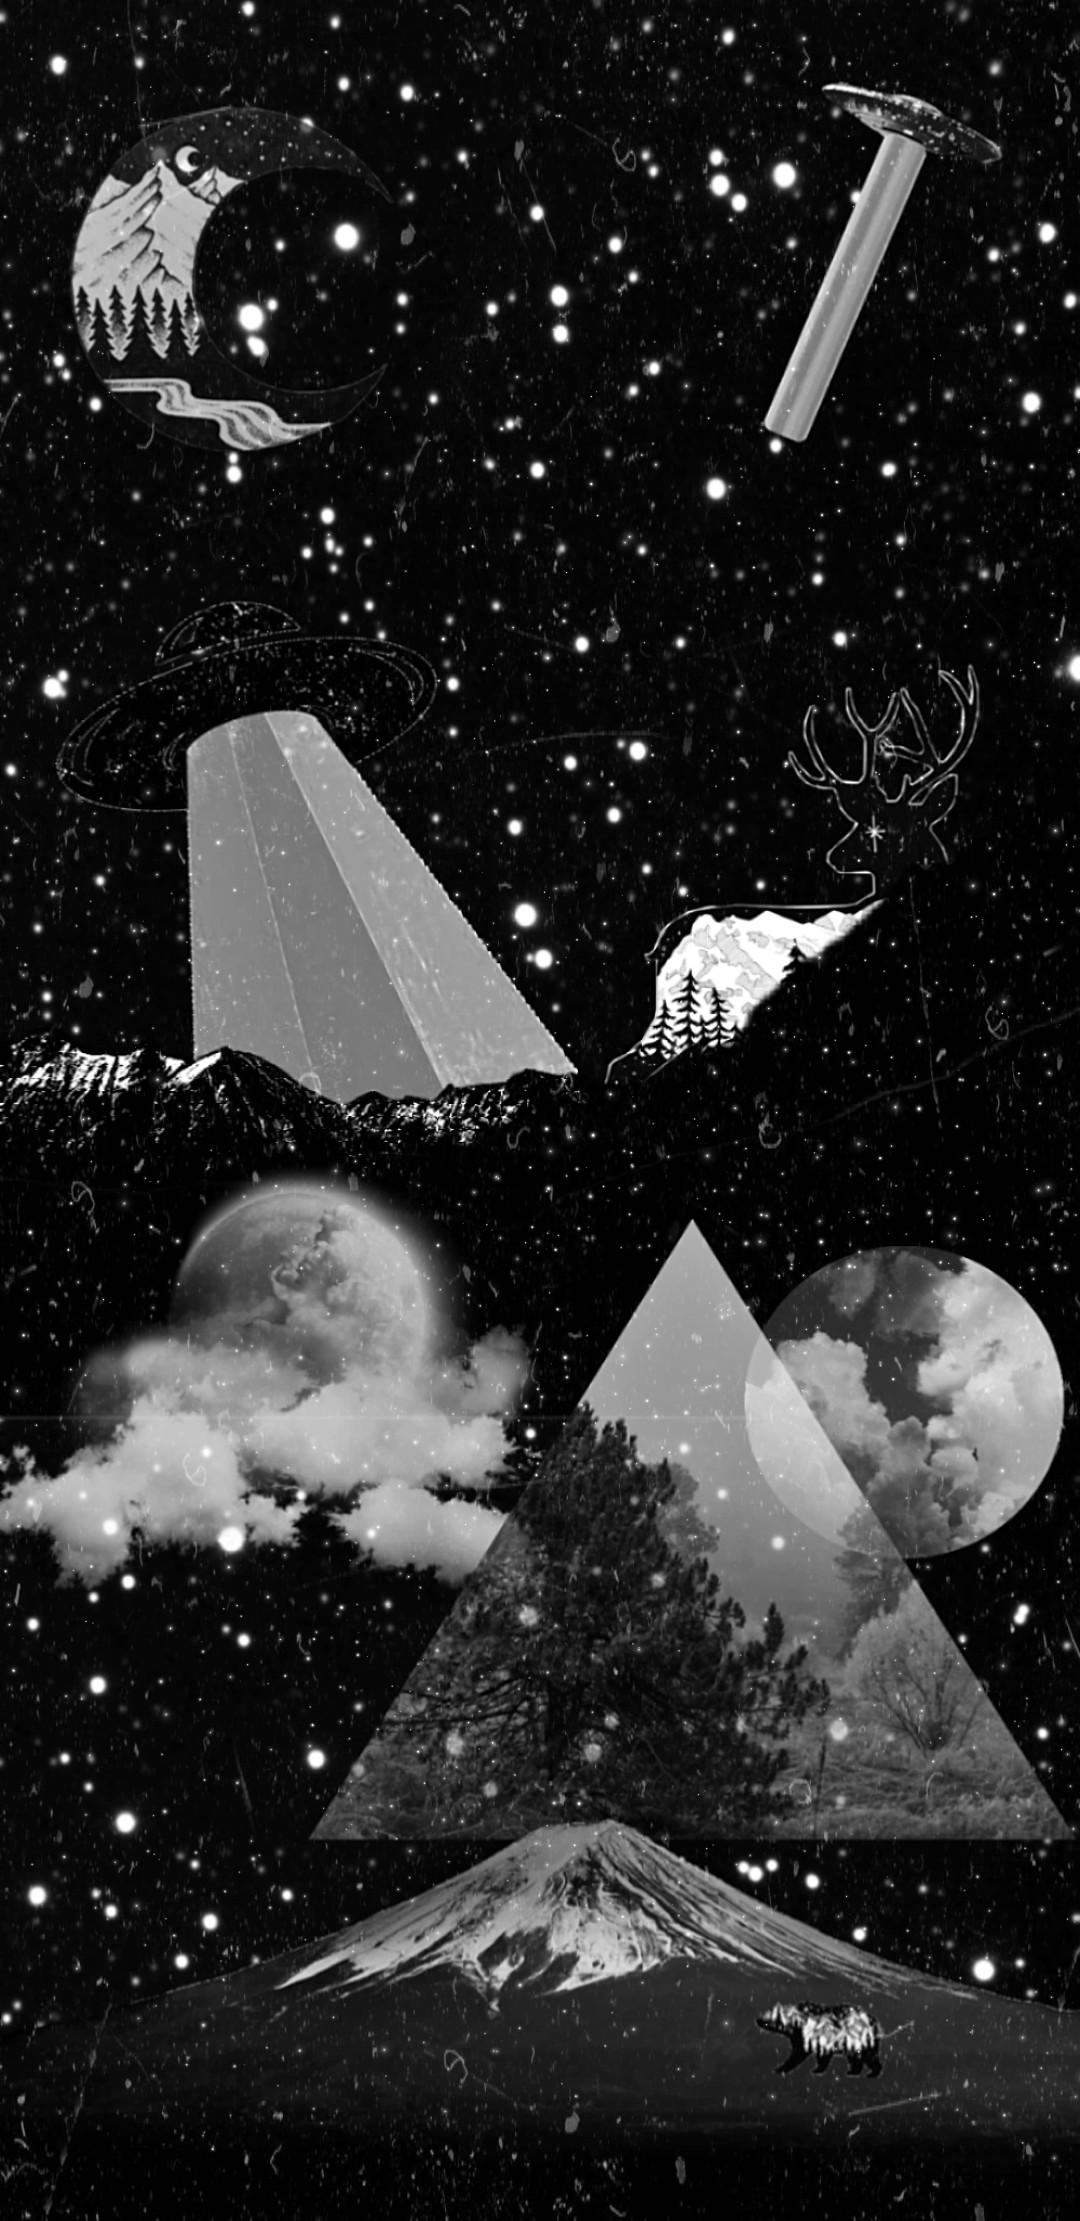 Aesthetic wallpaper with black background and white drawings of trees, mountains, clouds, and stars - Psychedelic, dark